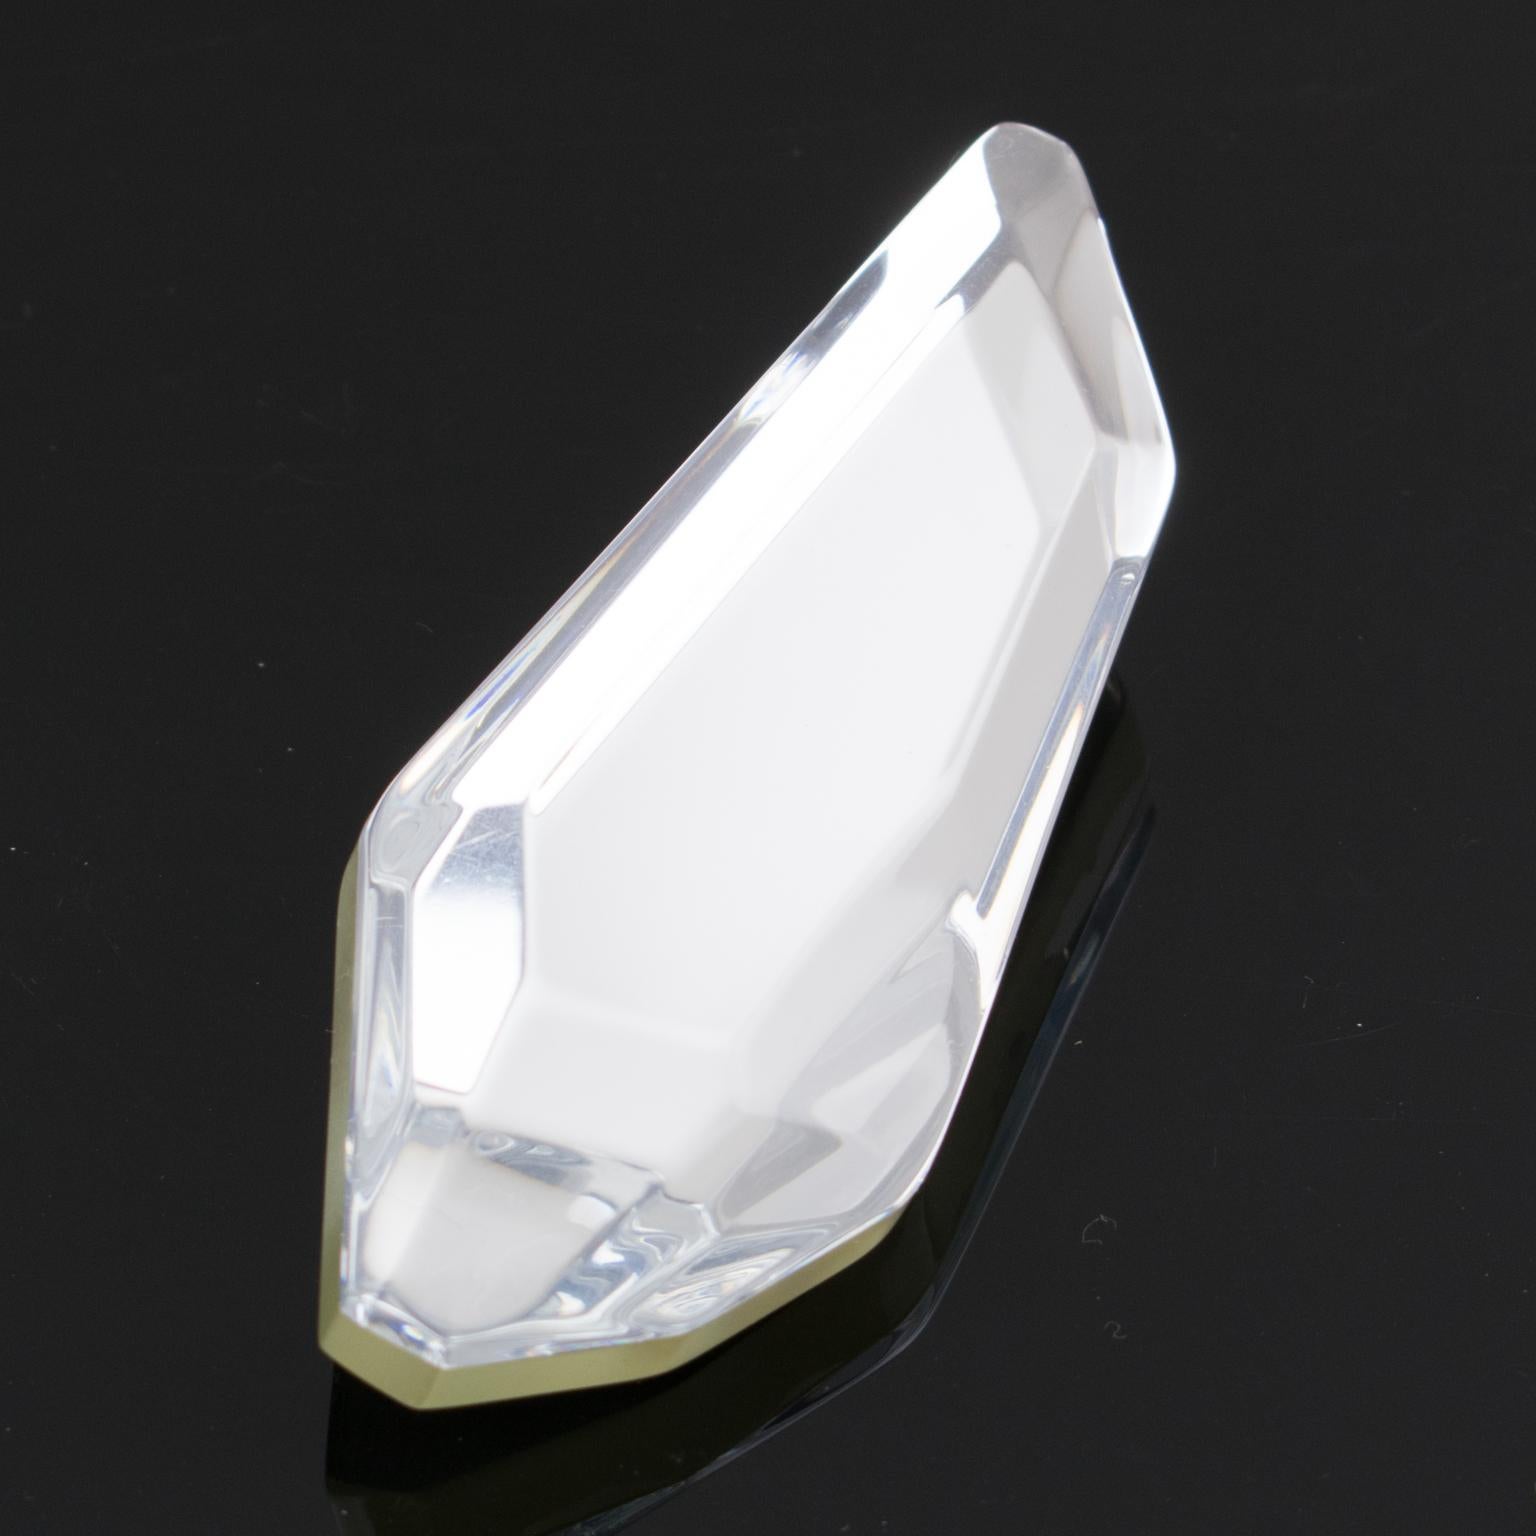 Kaso Silver Mirror Effect Ice Cube Lucite Asymmetric Pin Brooch In Excellent Condition For Sale In Atlanta, GA